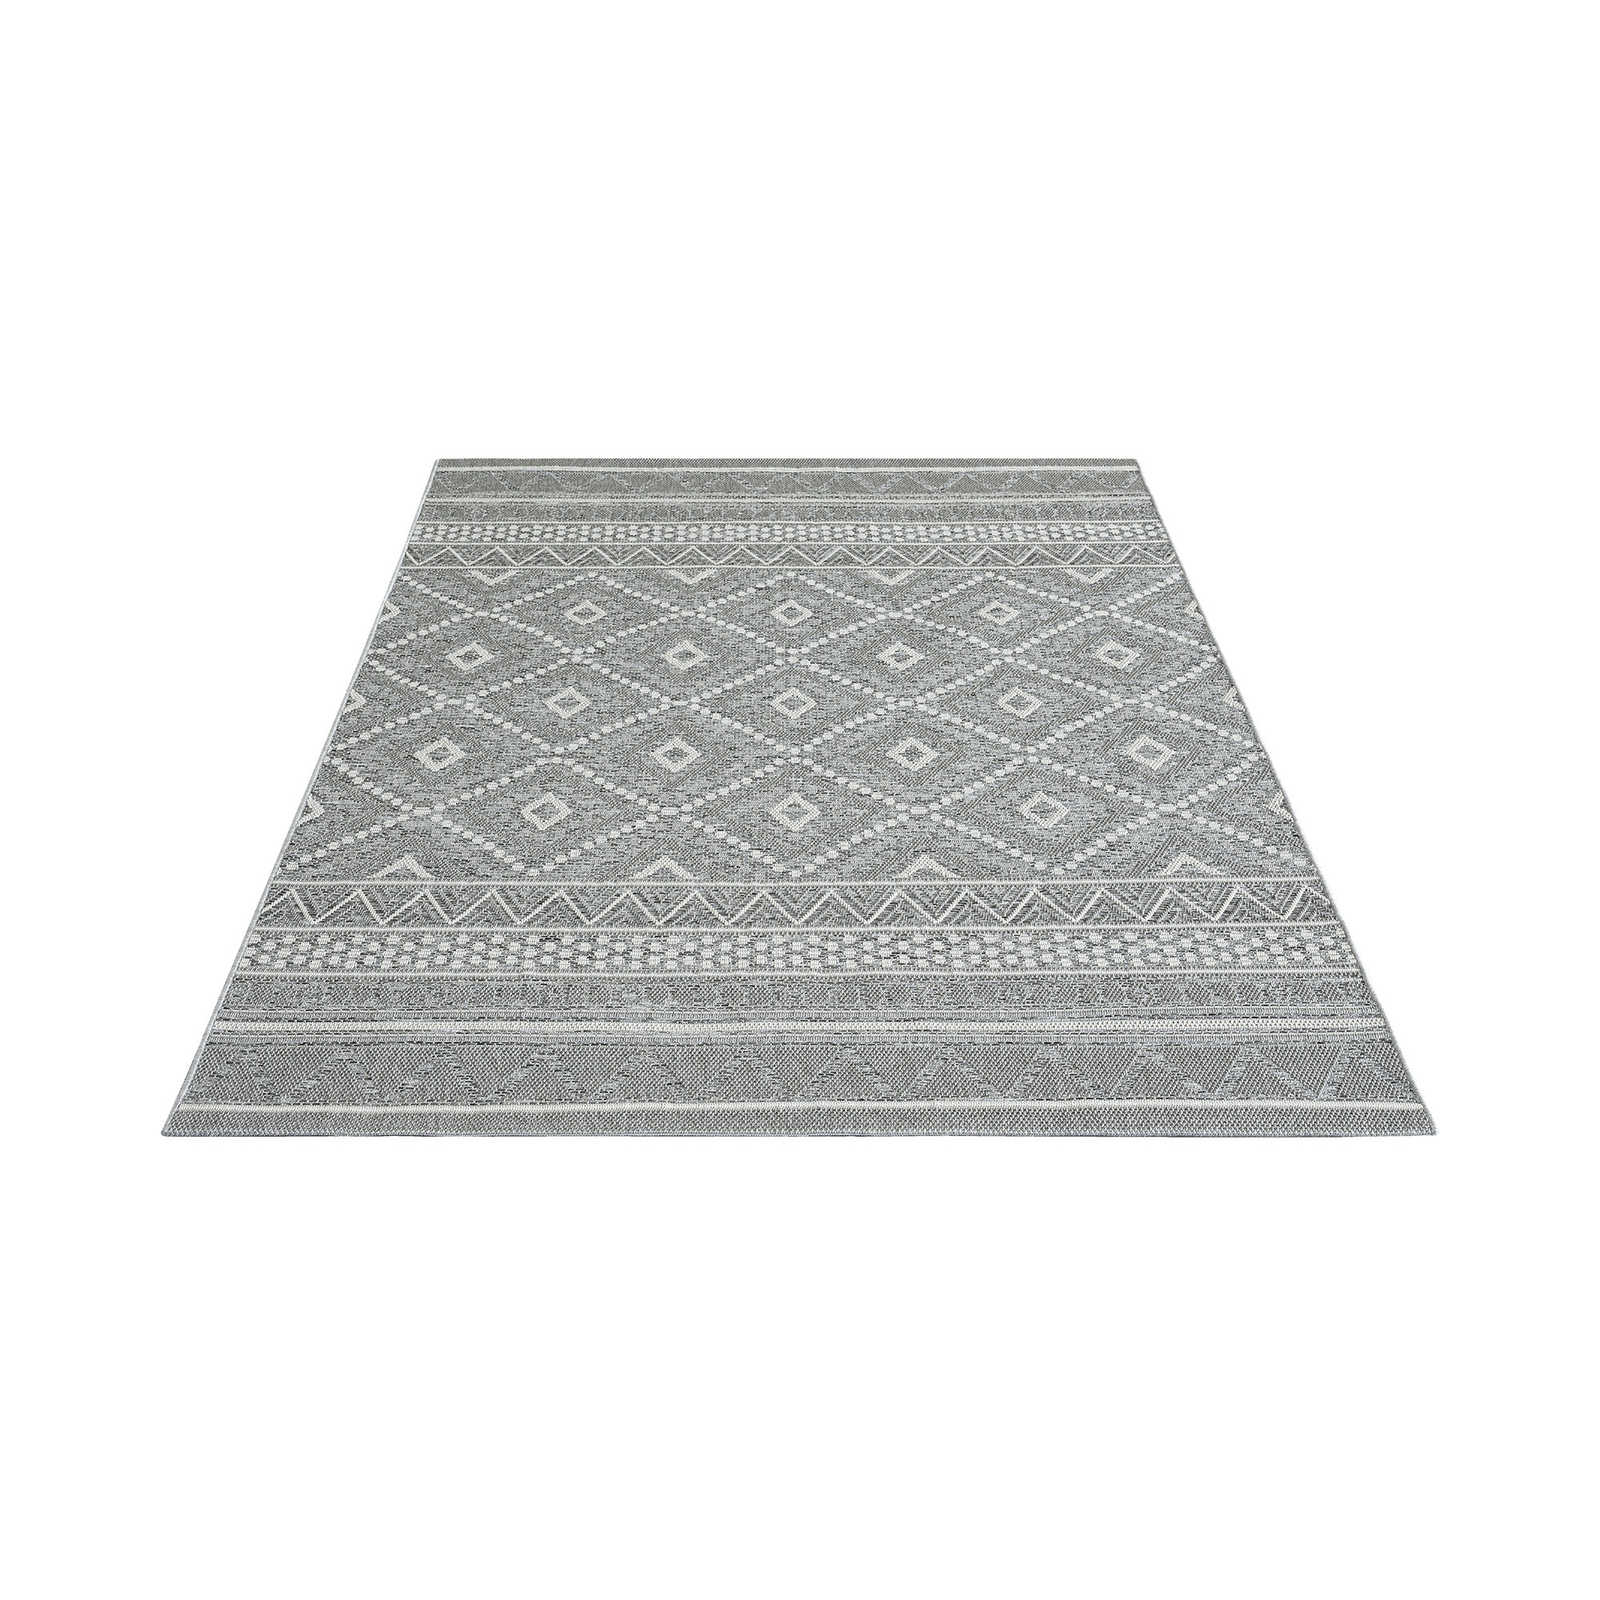 Patterned Outdoor Rug in Grey - 220 x 160 cm
